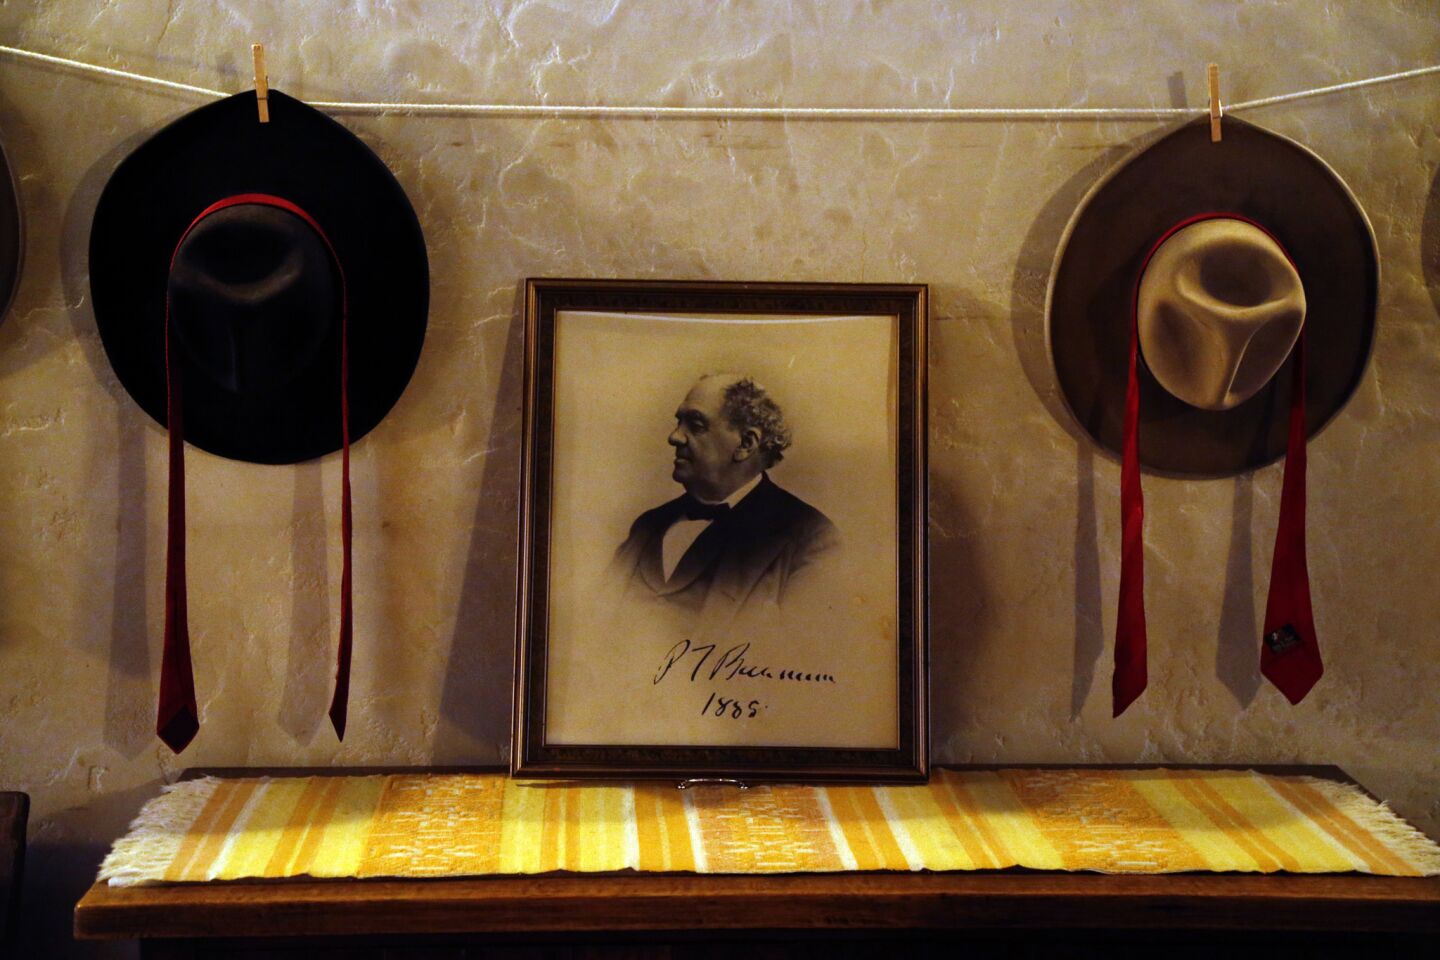 Two of Death Valley Scotty's hats are displayed in his bedroom. Walter Scott tempted the Johnsons into investing in a fictional gold mine. Even after realizing he was being swindled, Albert Johnson formed a lifelong friendship with the man and even housed him on the property.